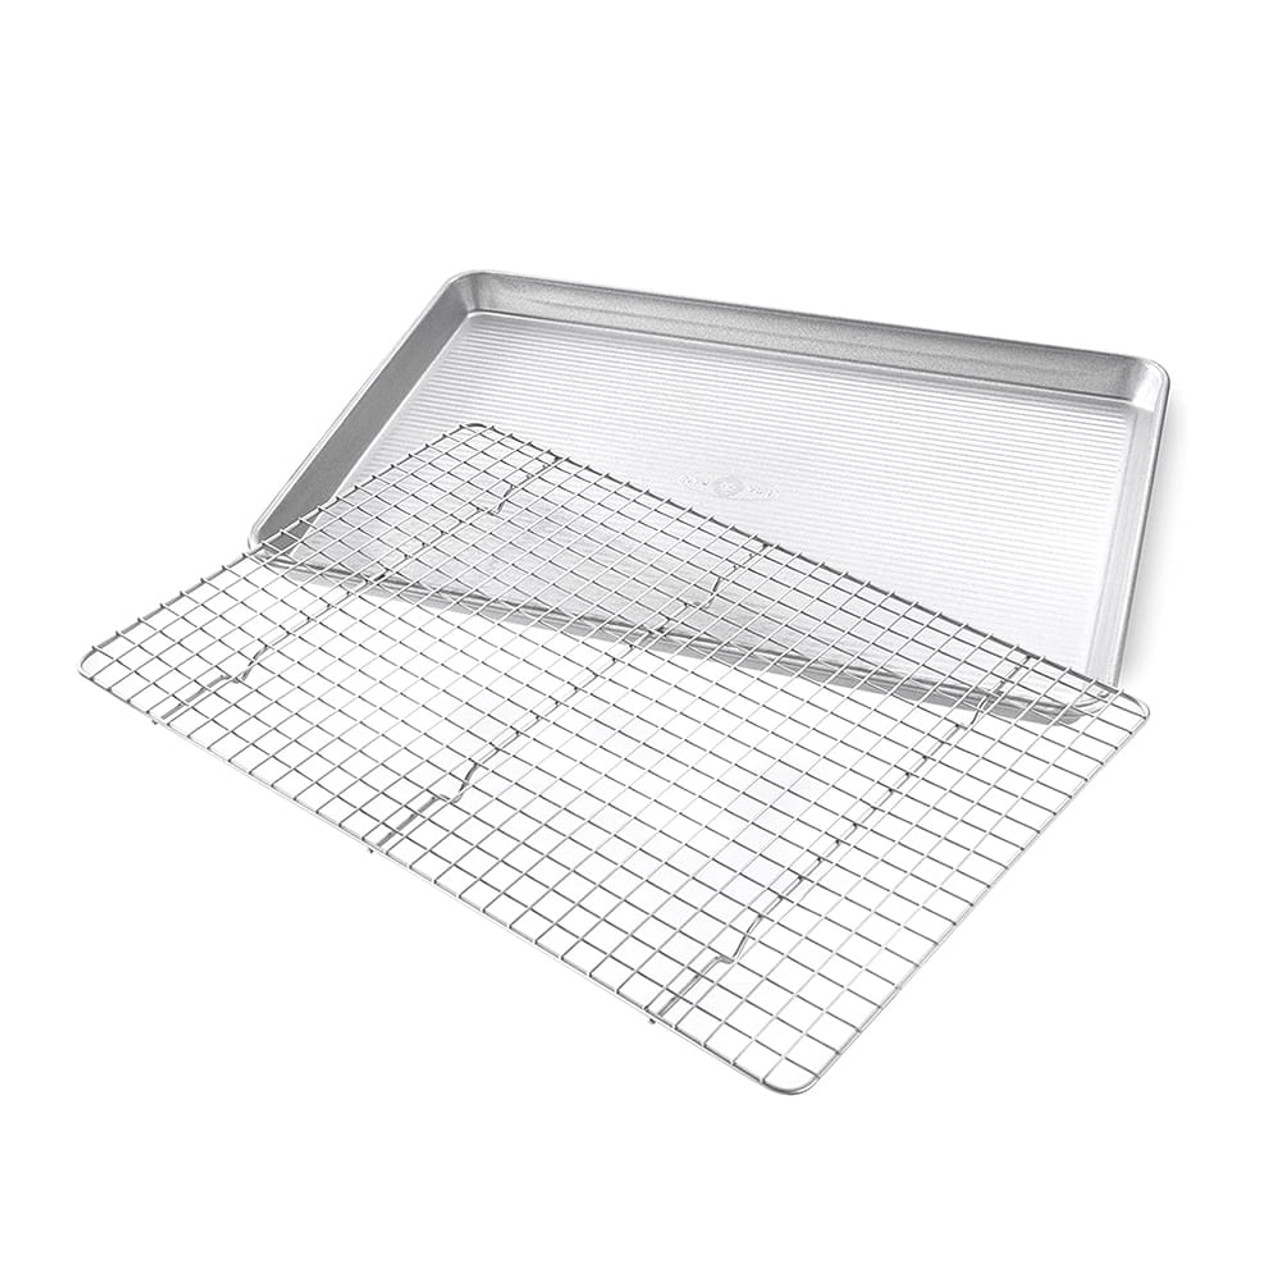 Half-Sheet Pan Nonstick 17.25 by 12.25 inches